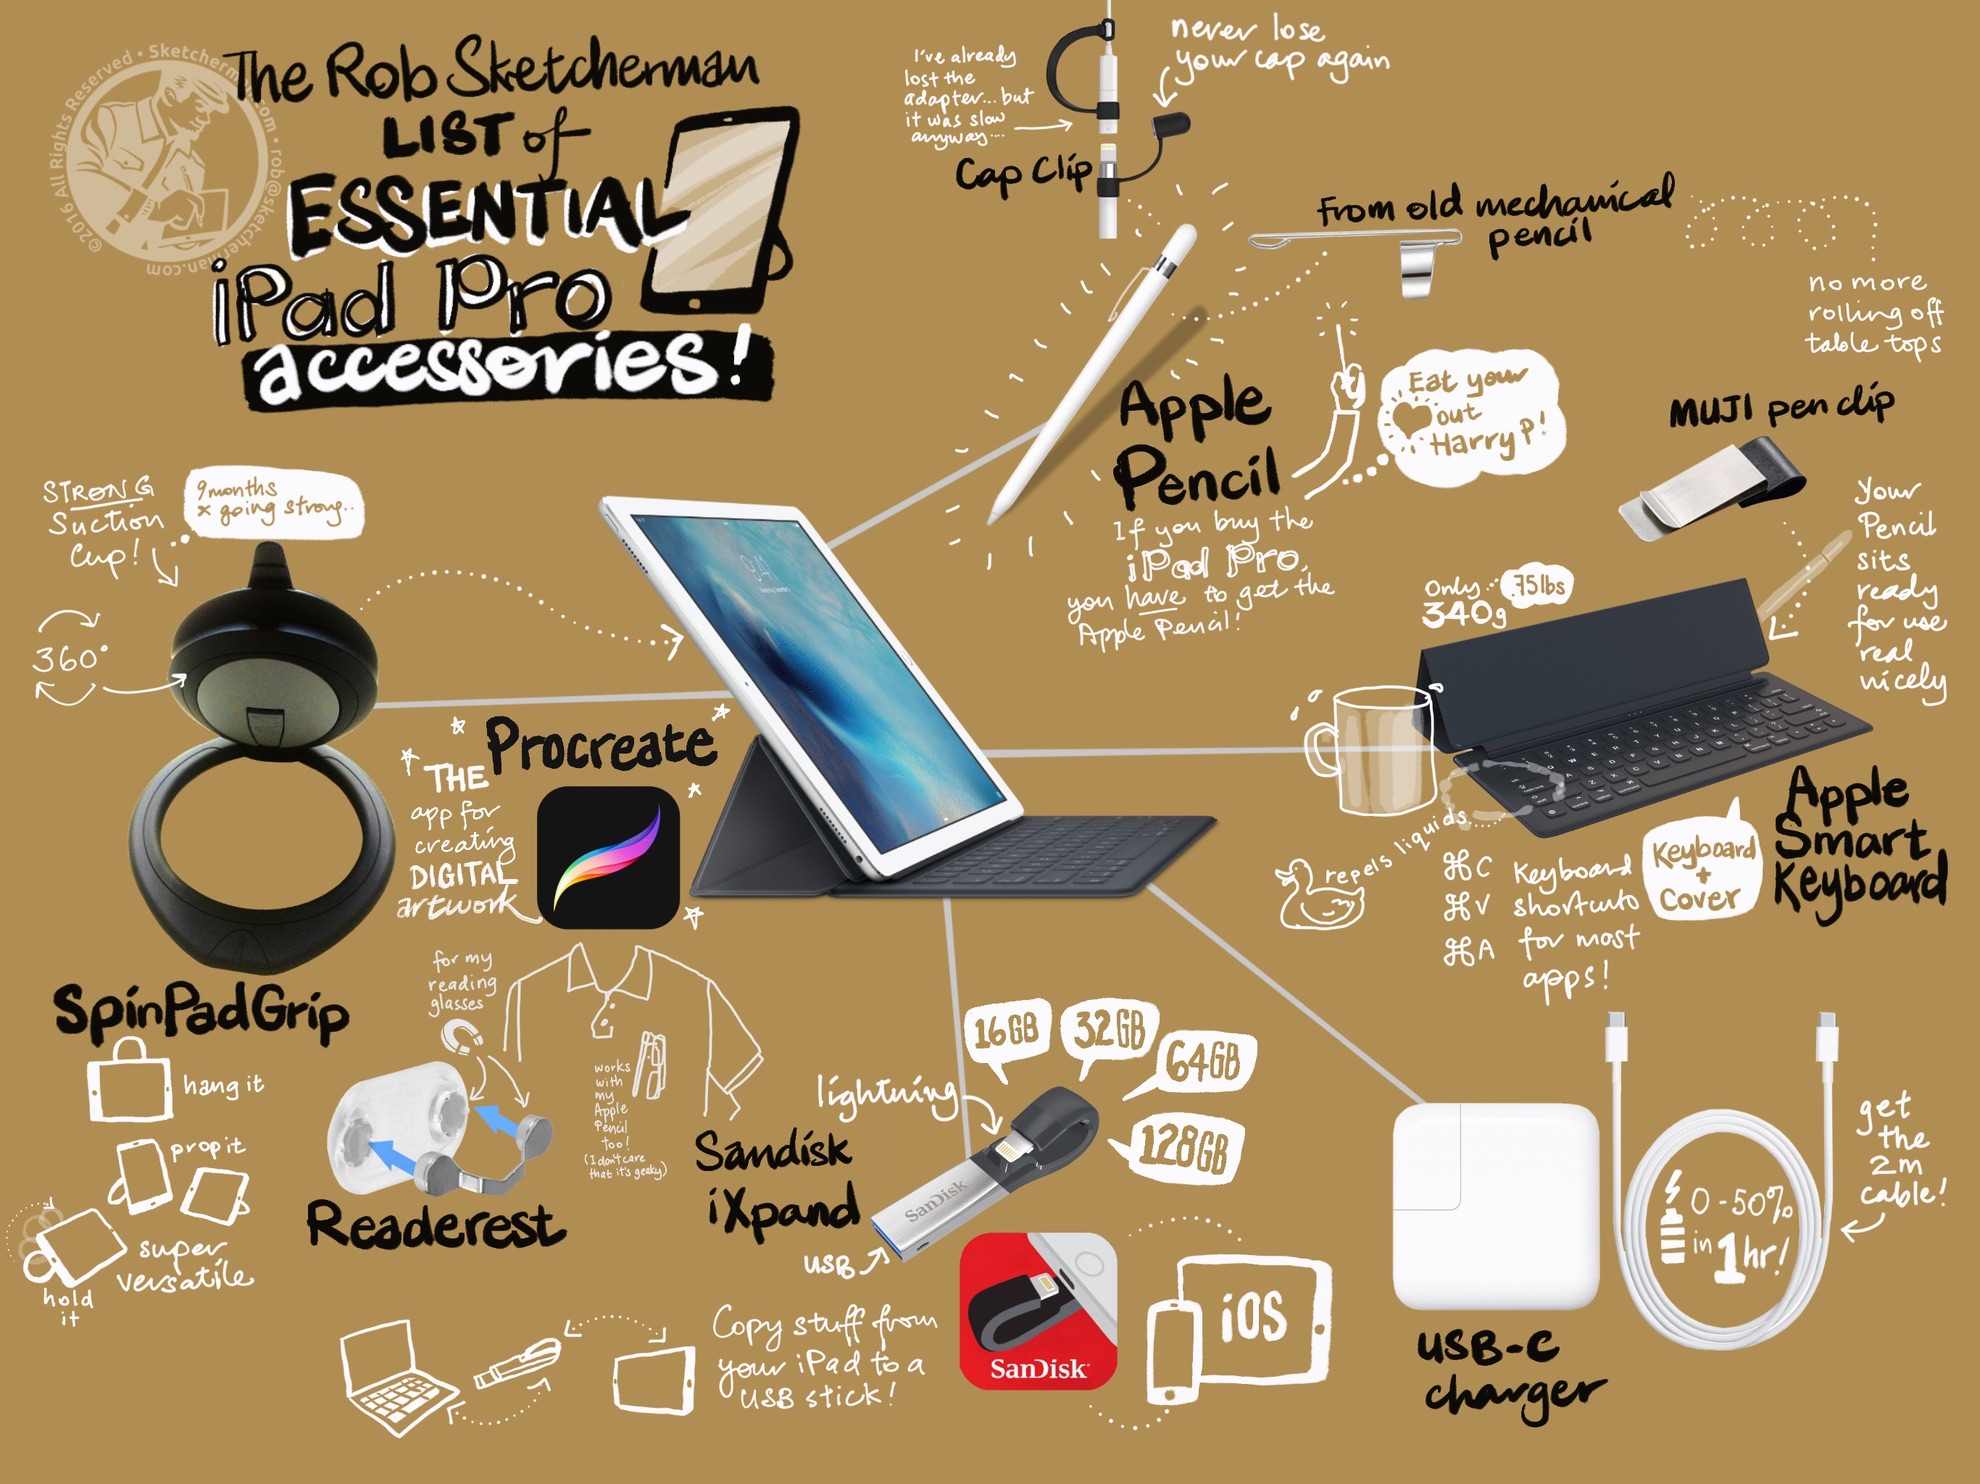 The Best iPad Sketching Accessories for Artists: 2016 Gear List Pt.2 —